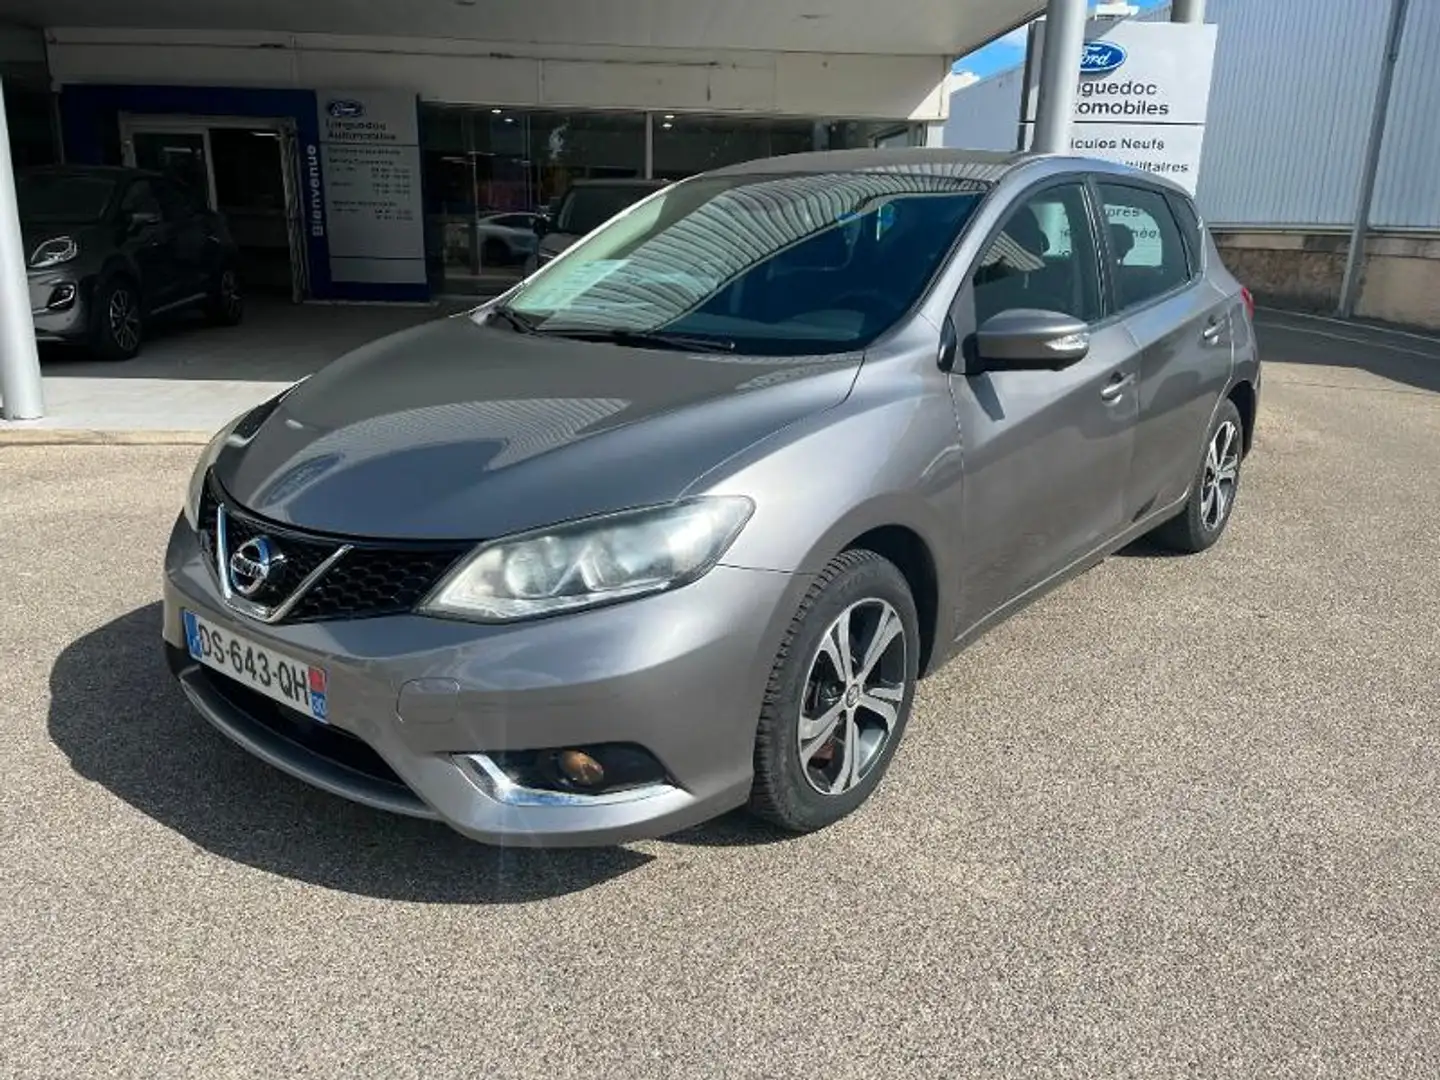 Nissan Pulsar 1.5 dCi 110ch Business Edition - 1